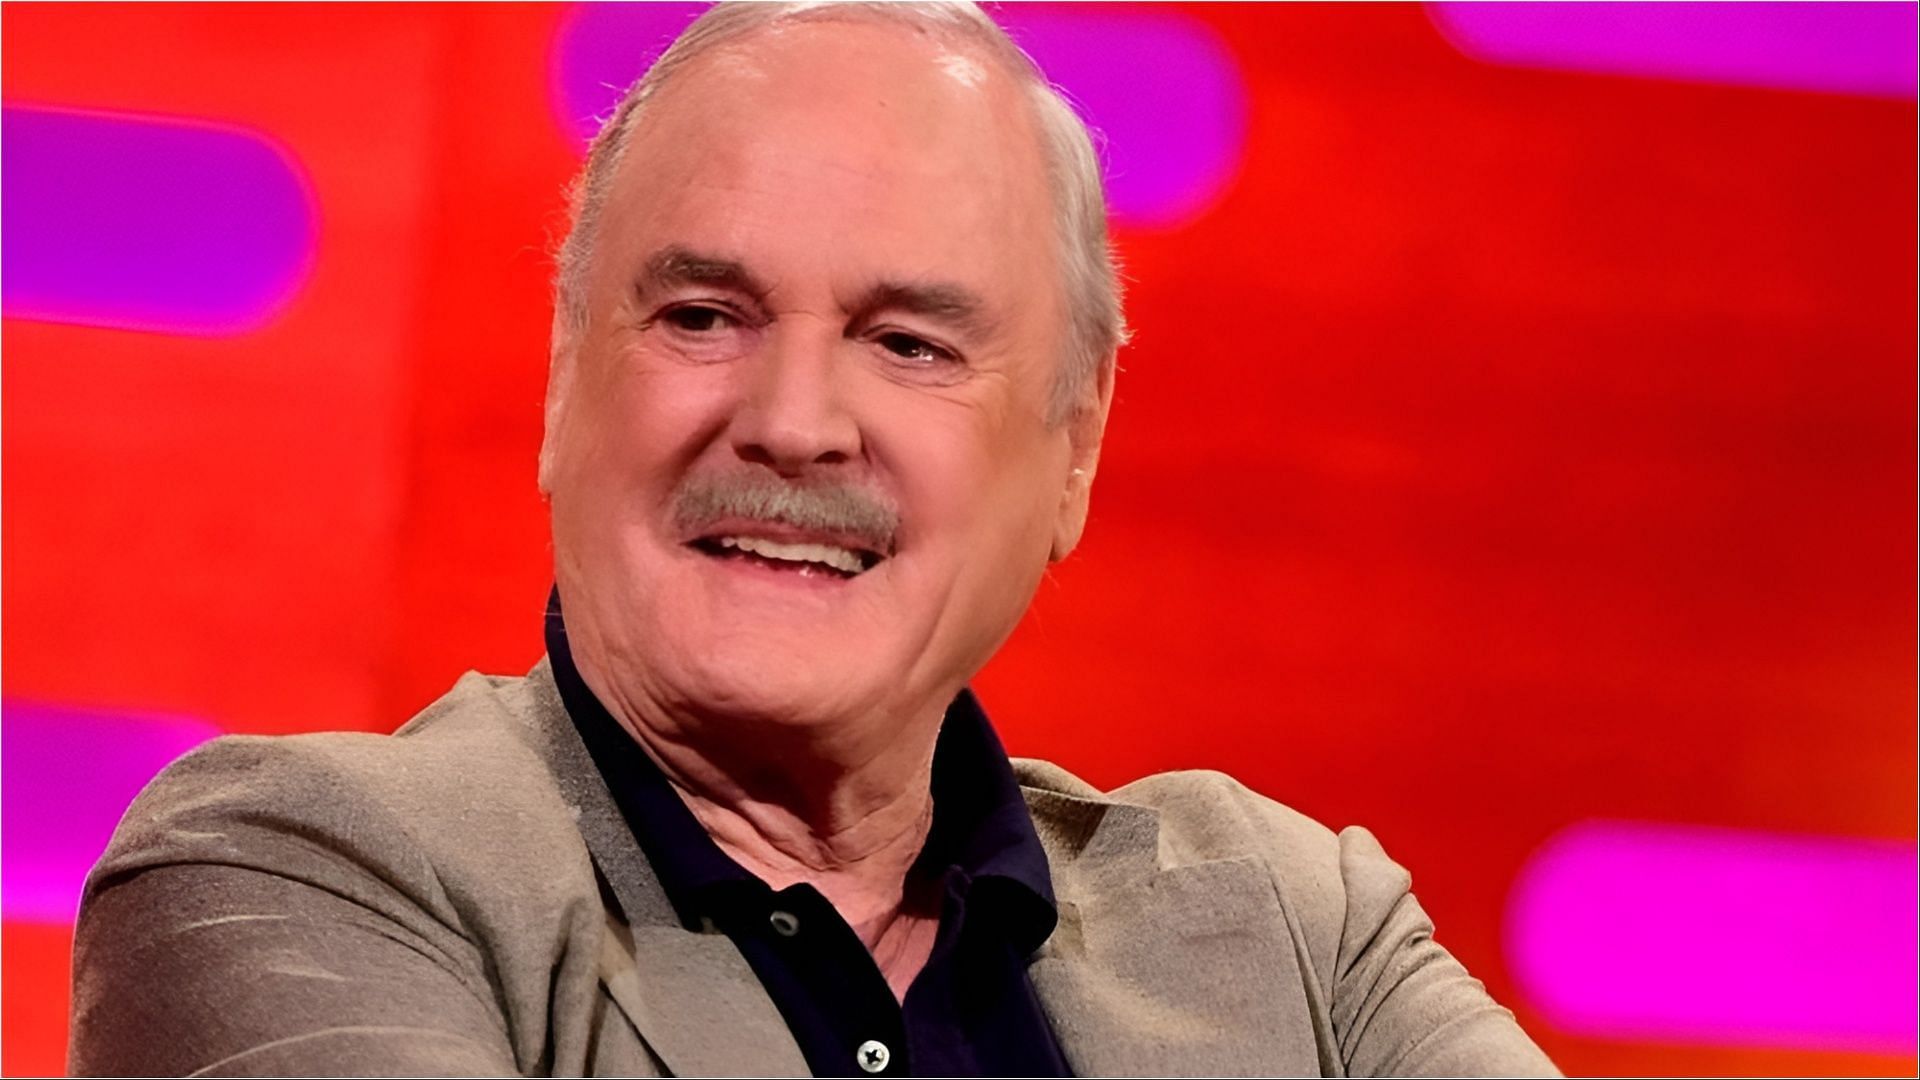 John Cleese was criticized for sharing a post where he compared Donald Trump and Adolf Hitler (Image via Rod Paul/Facebook)